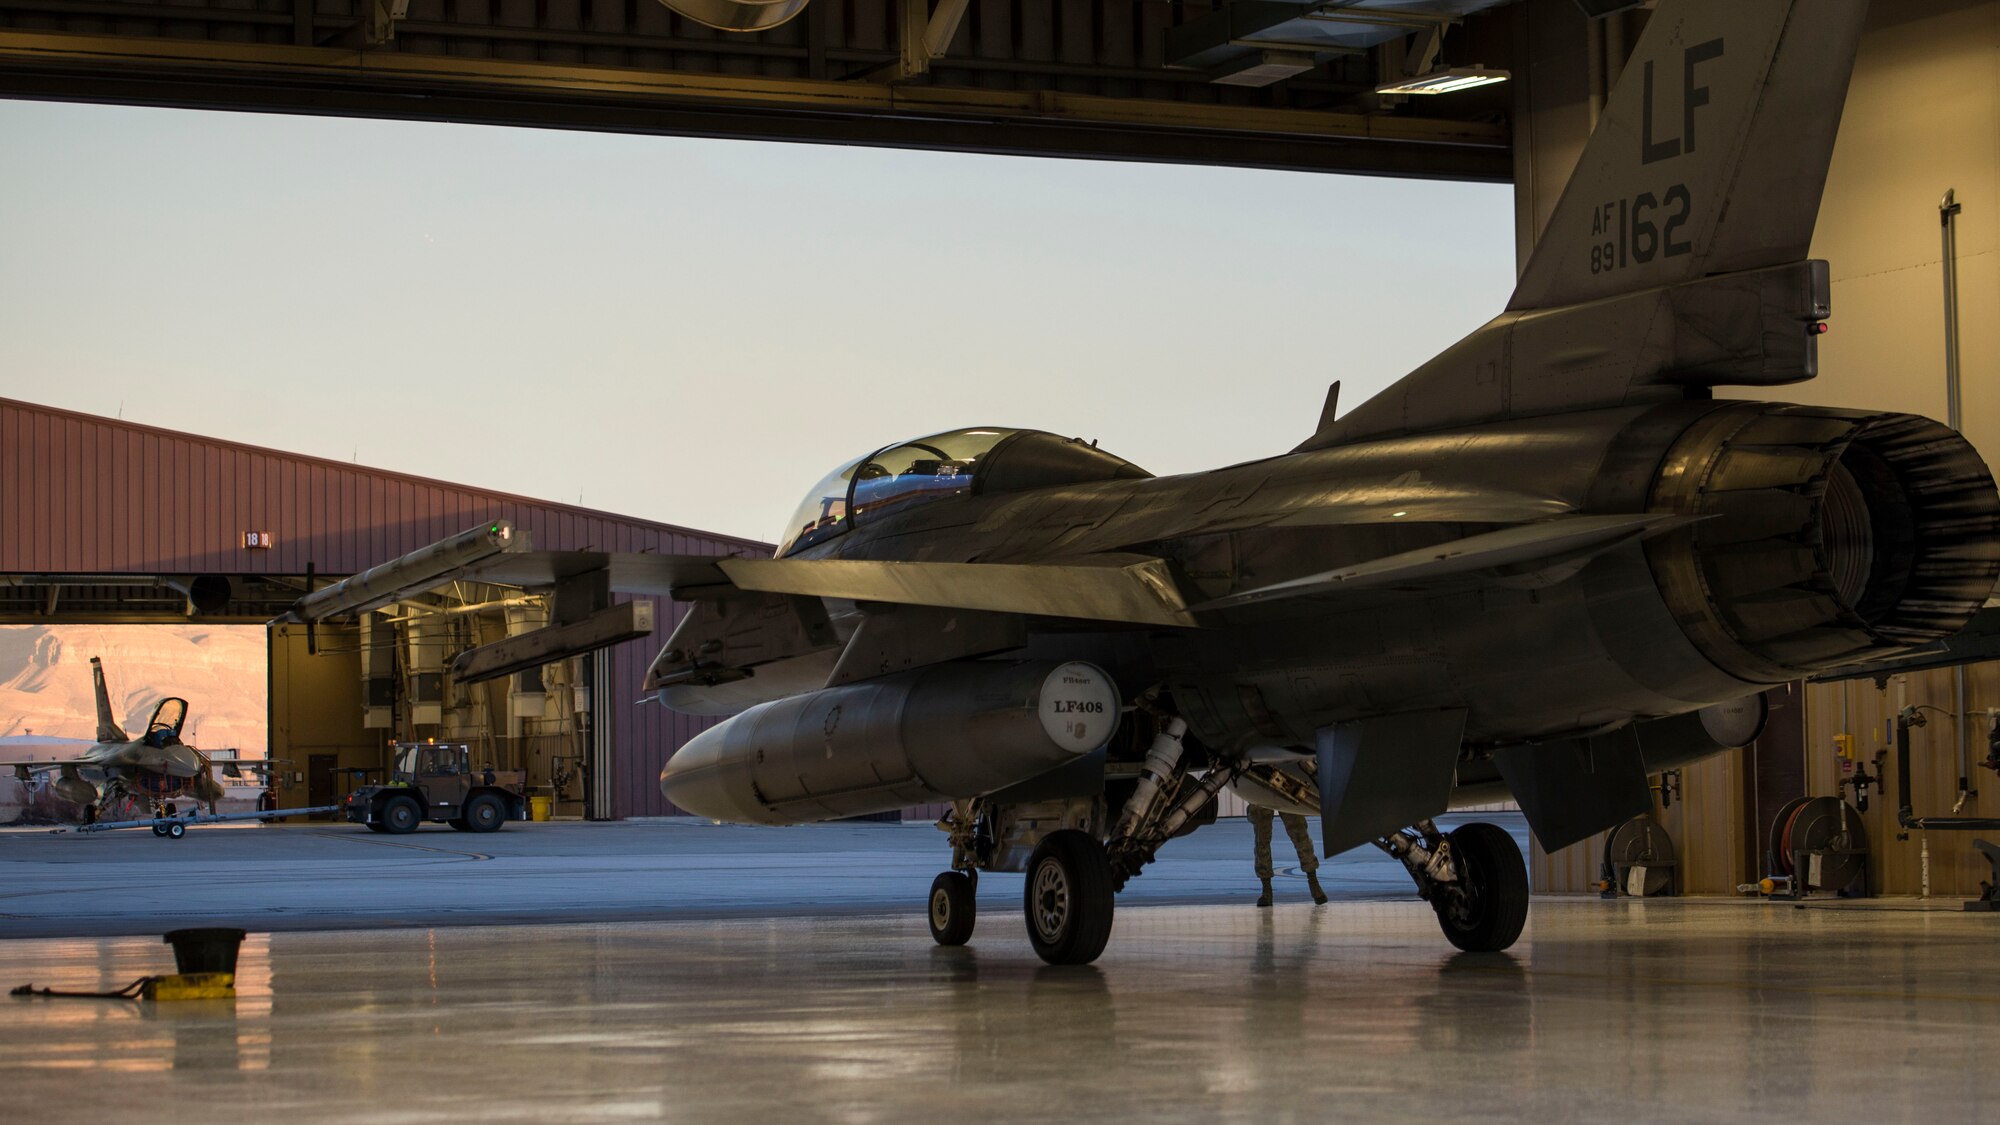 An F-16 Fighting Falcon piloted by Maj. Brent Ellis, a fighter pilot with the 311th Fighter Squadron, prepares to exit a hangar, at Holloman Air Force Base, N.M., on Jan. 9, 2017. Ellis flew Brig. Gen. Eric Sanchez, the Commanding General at White Sands Missile Range, on a familiarization flight to demonstrate Holloman’s F-16 mission and the aircraft’s capabilities. Sanchez visited Holloman AFB to attend an airspace and mission brief related to Holloman and WSMR’s ongoing partnership. (U.S. Air Force photo by Airman 1st Class Alexis P. Docherty)